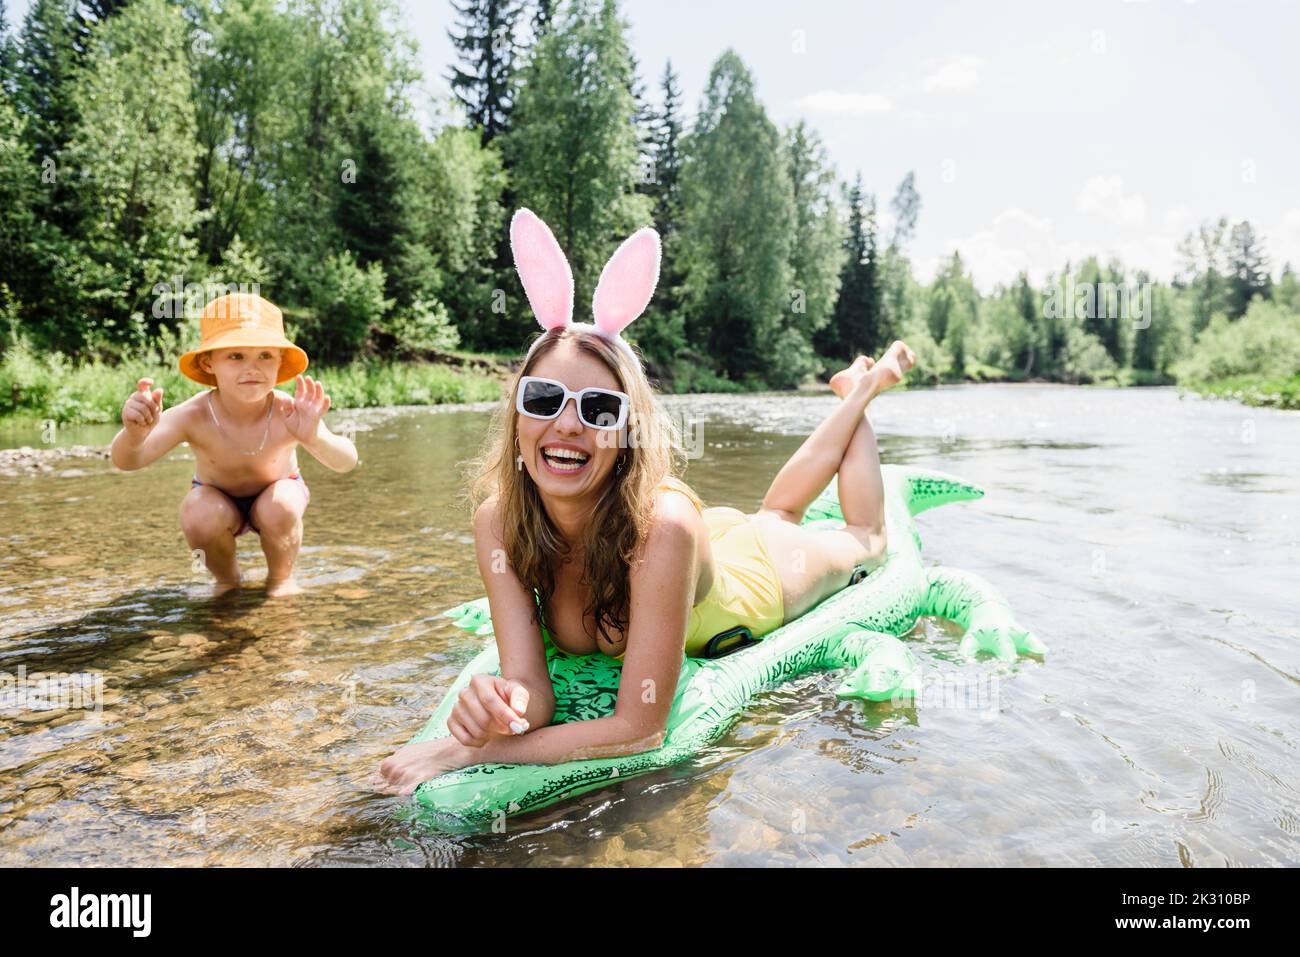 Happy woman relaxing on inflatable crocodile by son playing in water Stock Photo